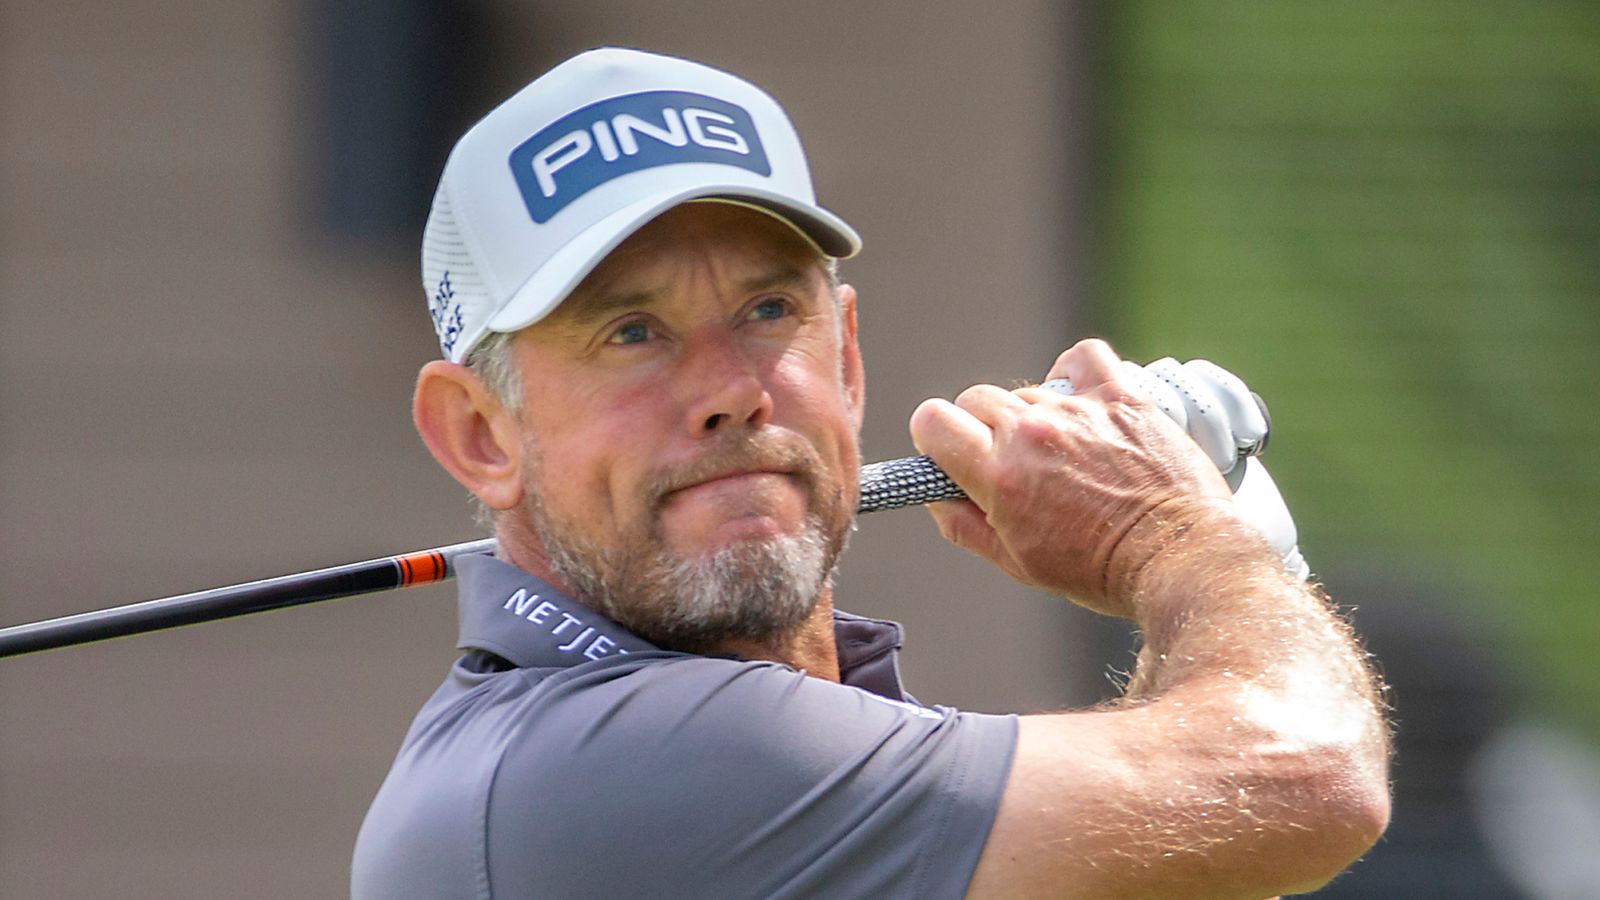 Tokyo Olympics Lee Westwood confirms he won't feature even if he